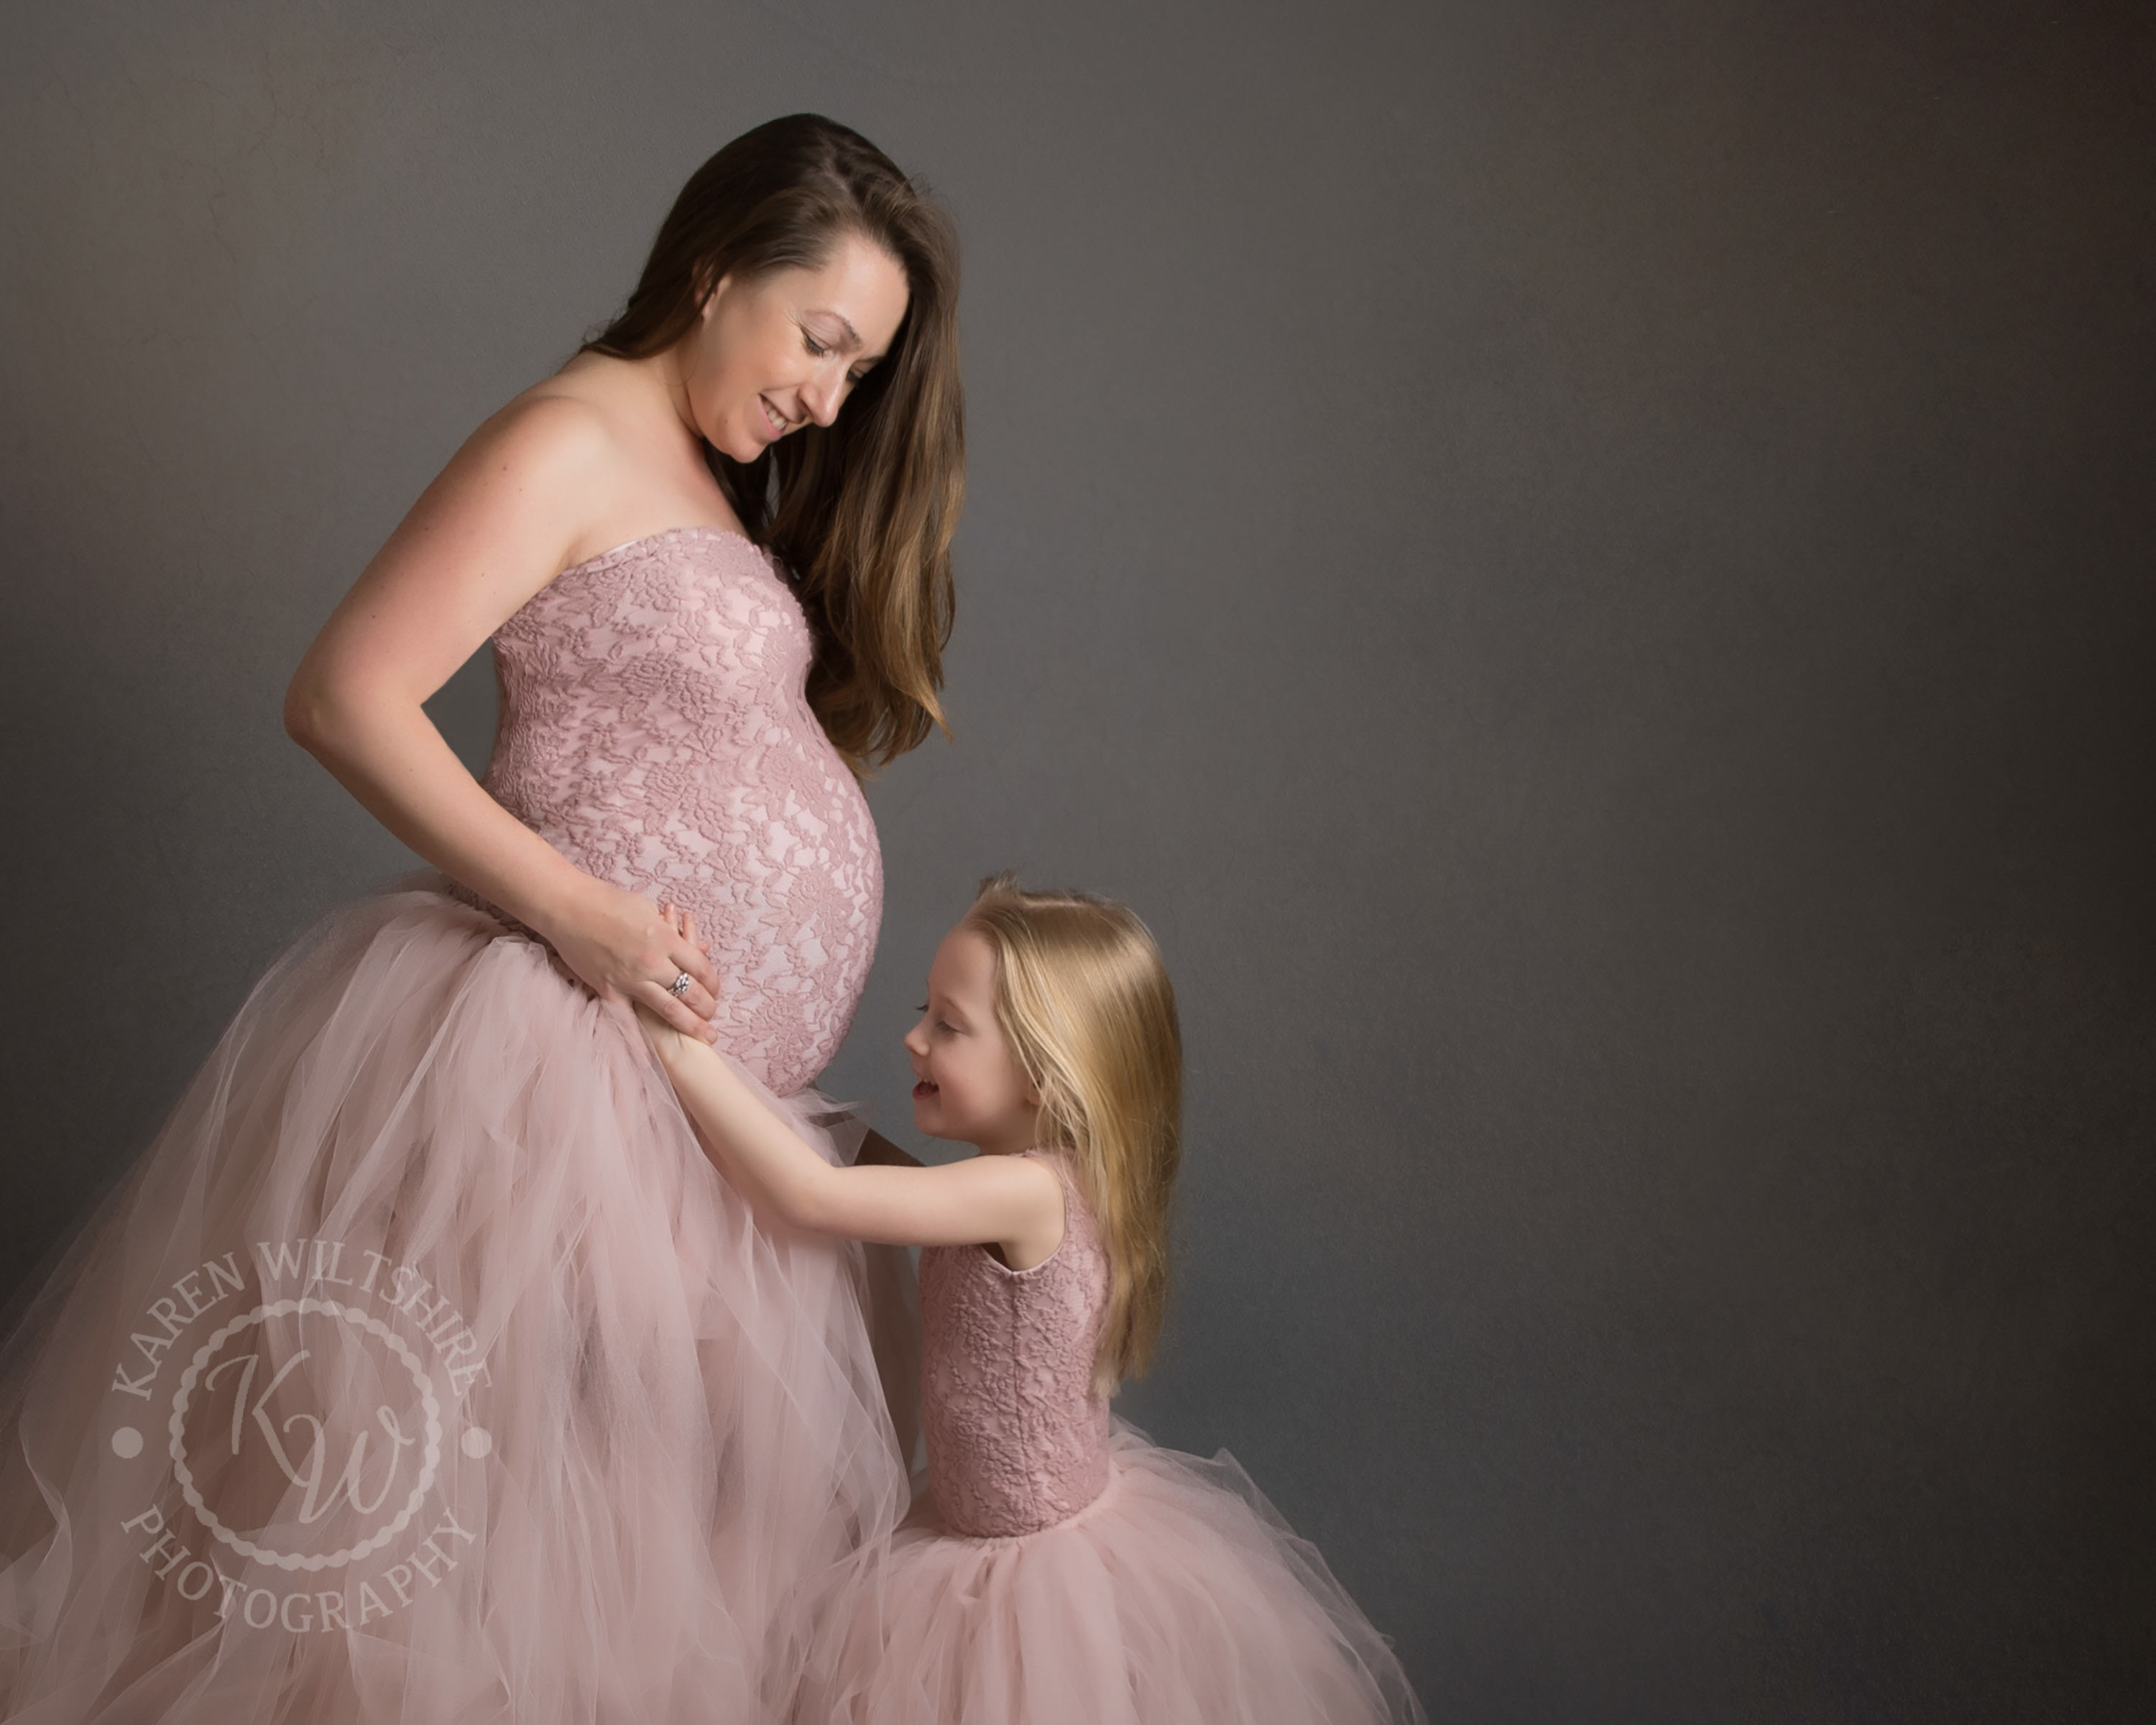 Maternity Photography Sessions - Prices - Karen Wiltshire Photography